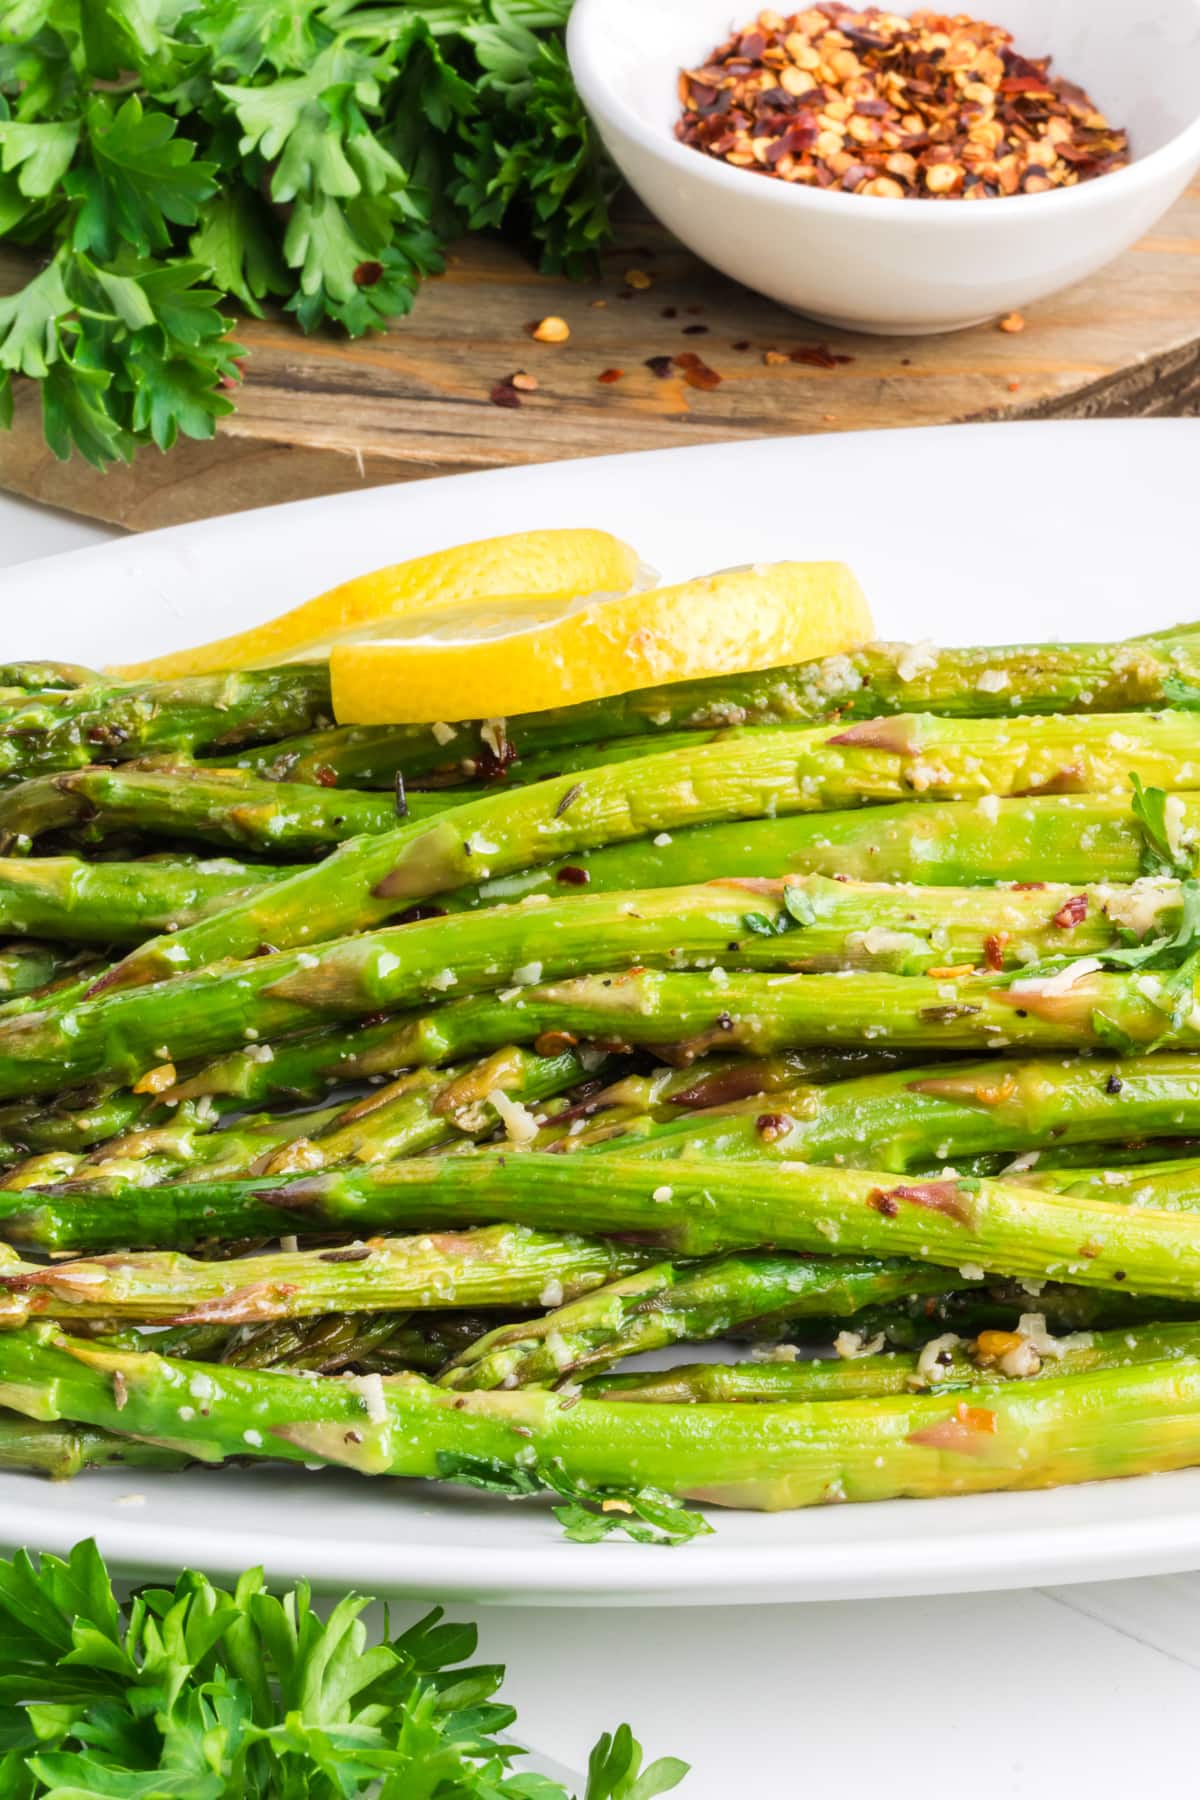 Oven roasted asparagus on a plate